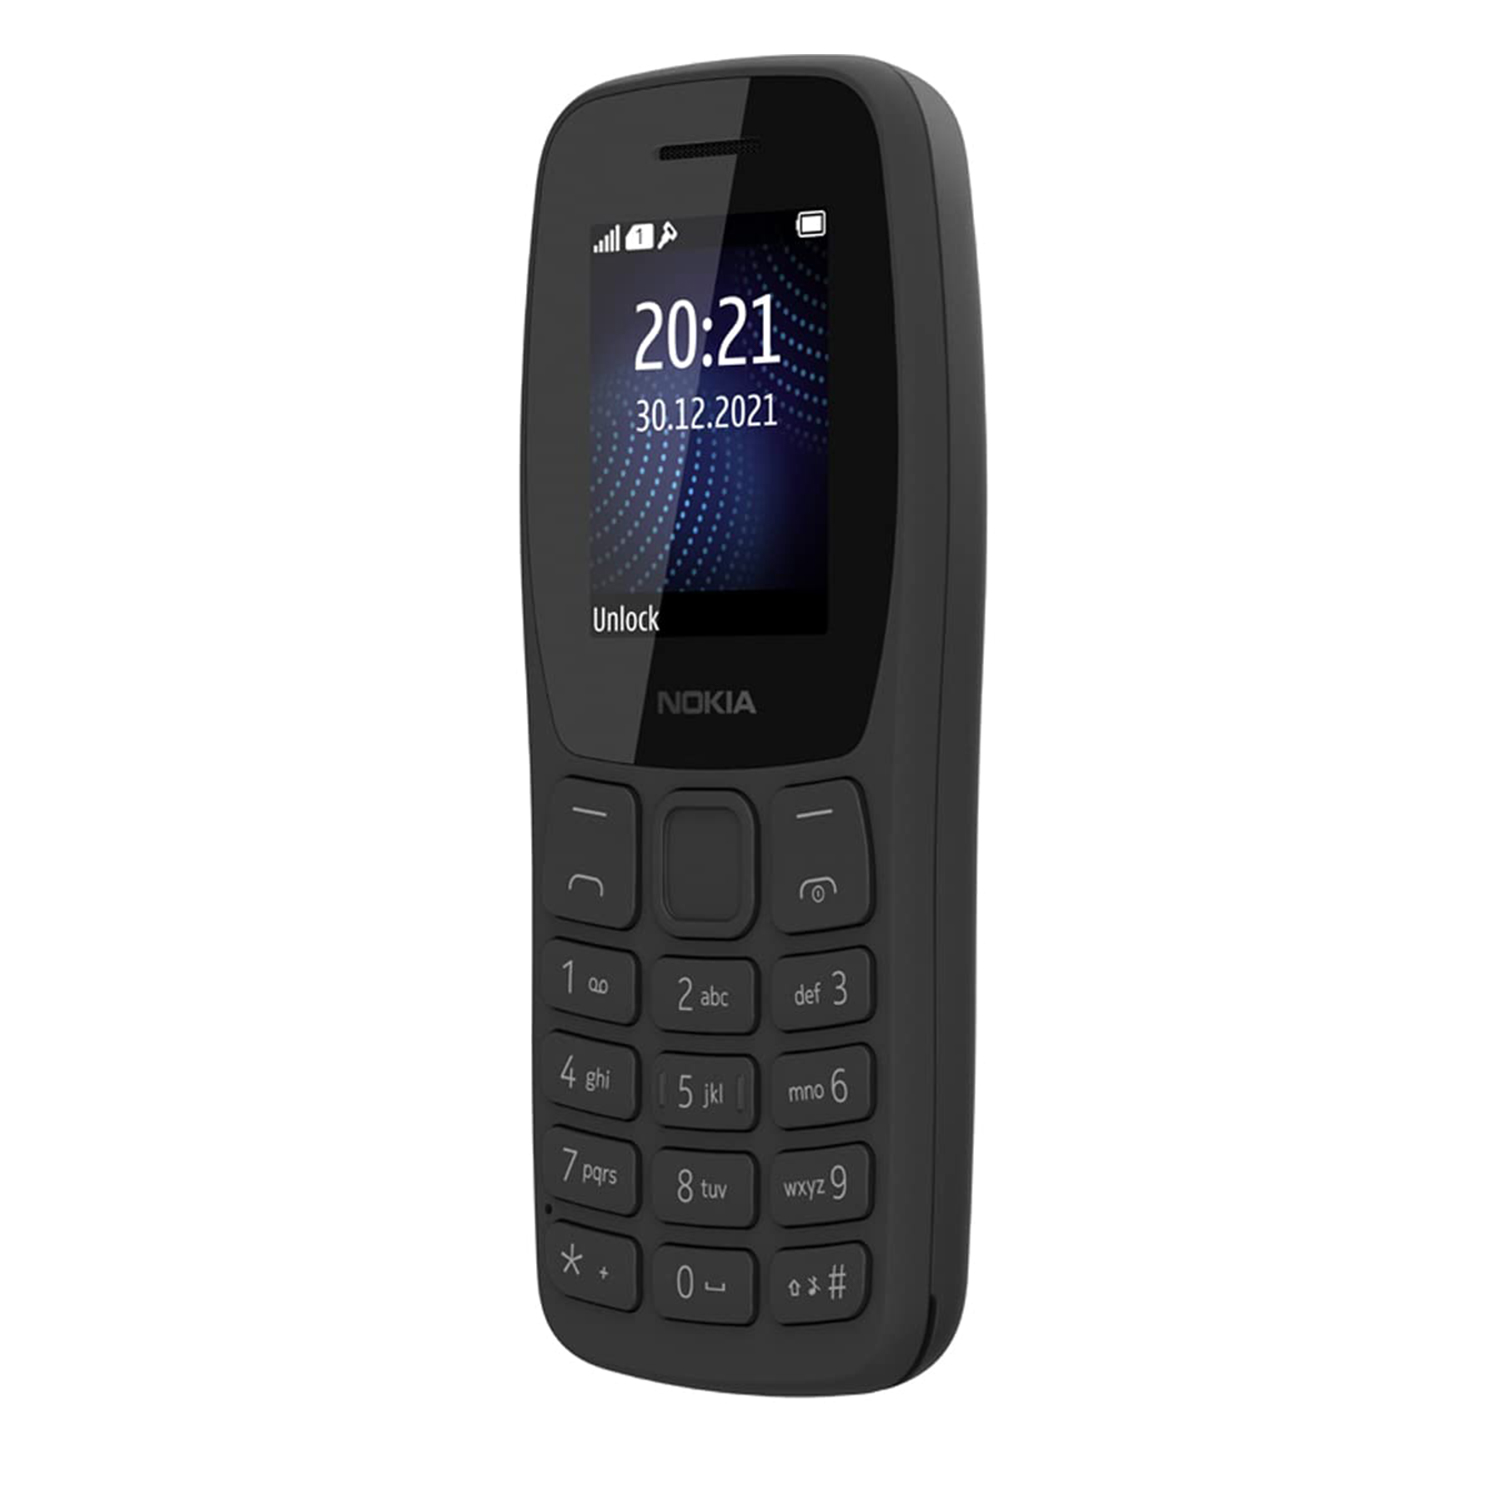 Nokia 105 Plus Single SIM, Keypad Mobile Phone with Wireless FM Radio, Memory Card Slot and MP3 Player (Charcoal)